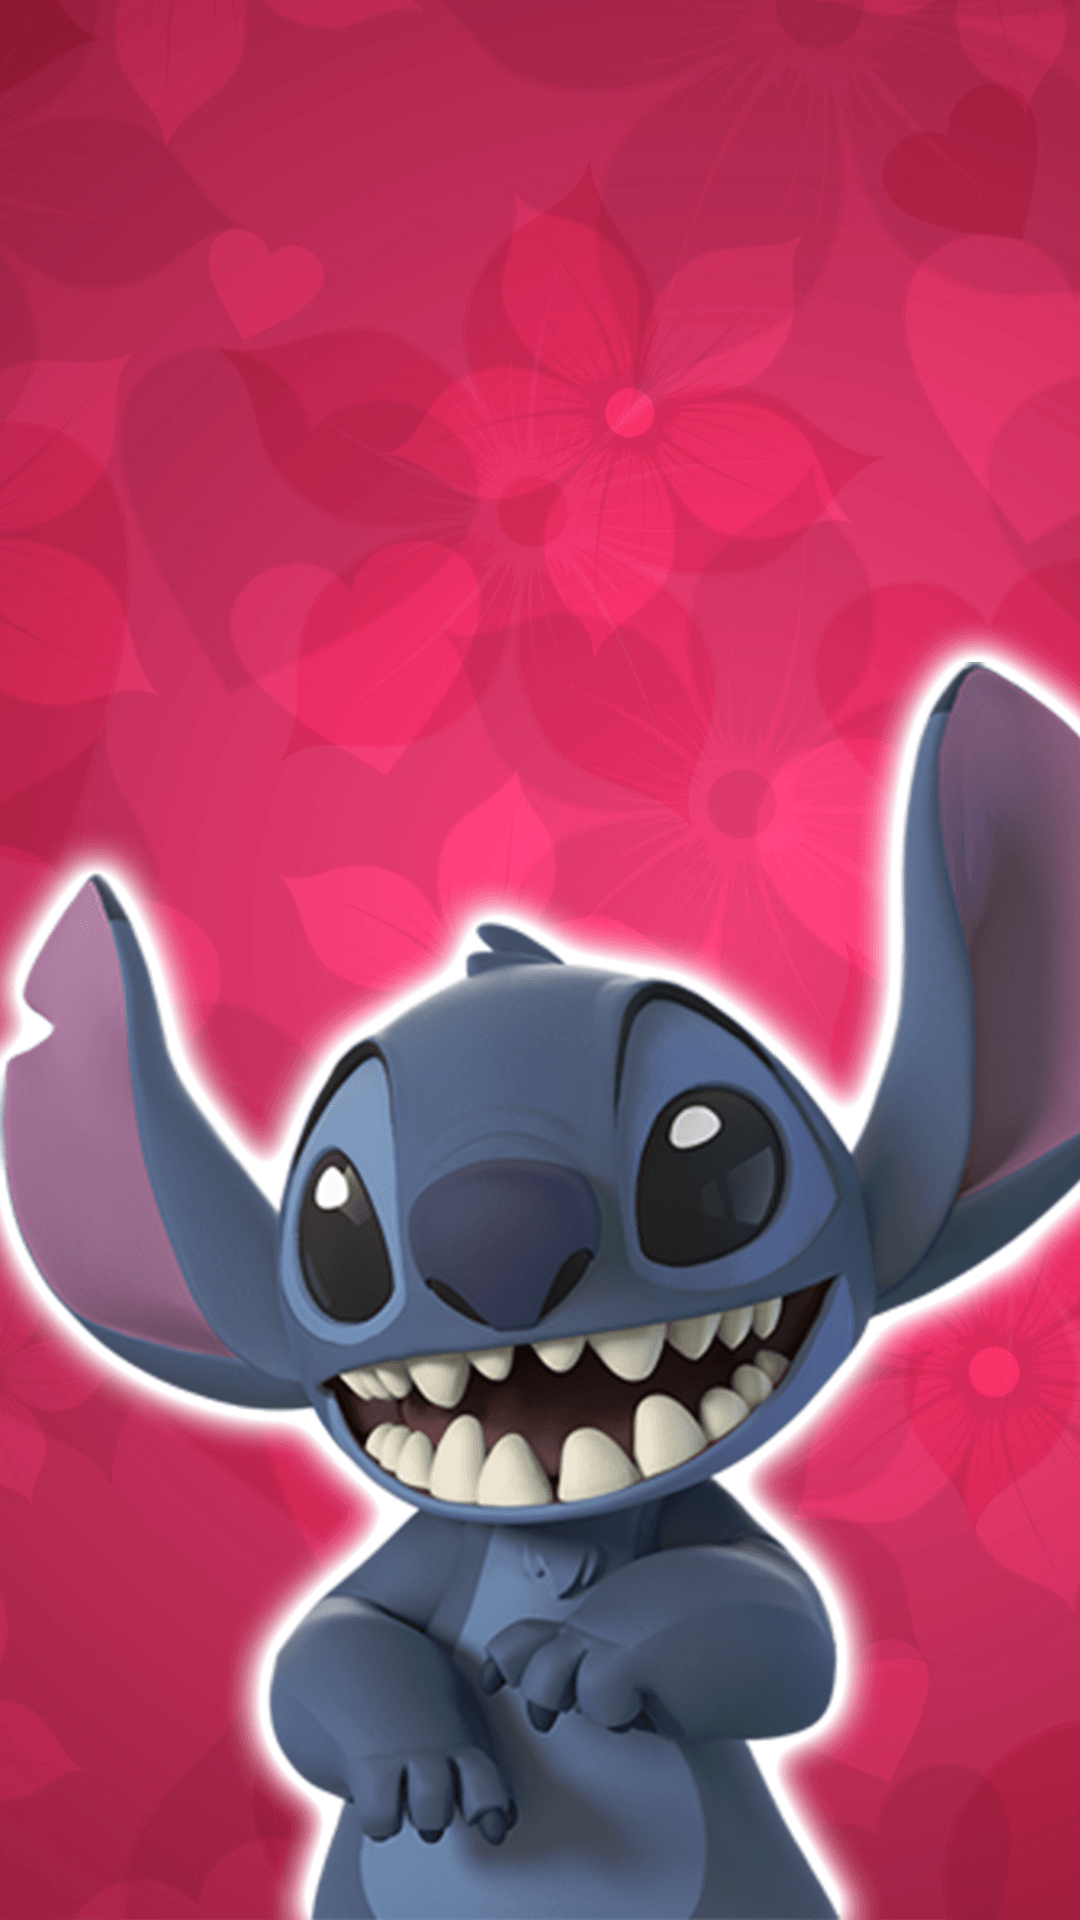 Disney Stitch Valentines Day, Download Wallpapers on Jakpost.travel.